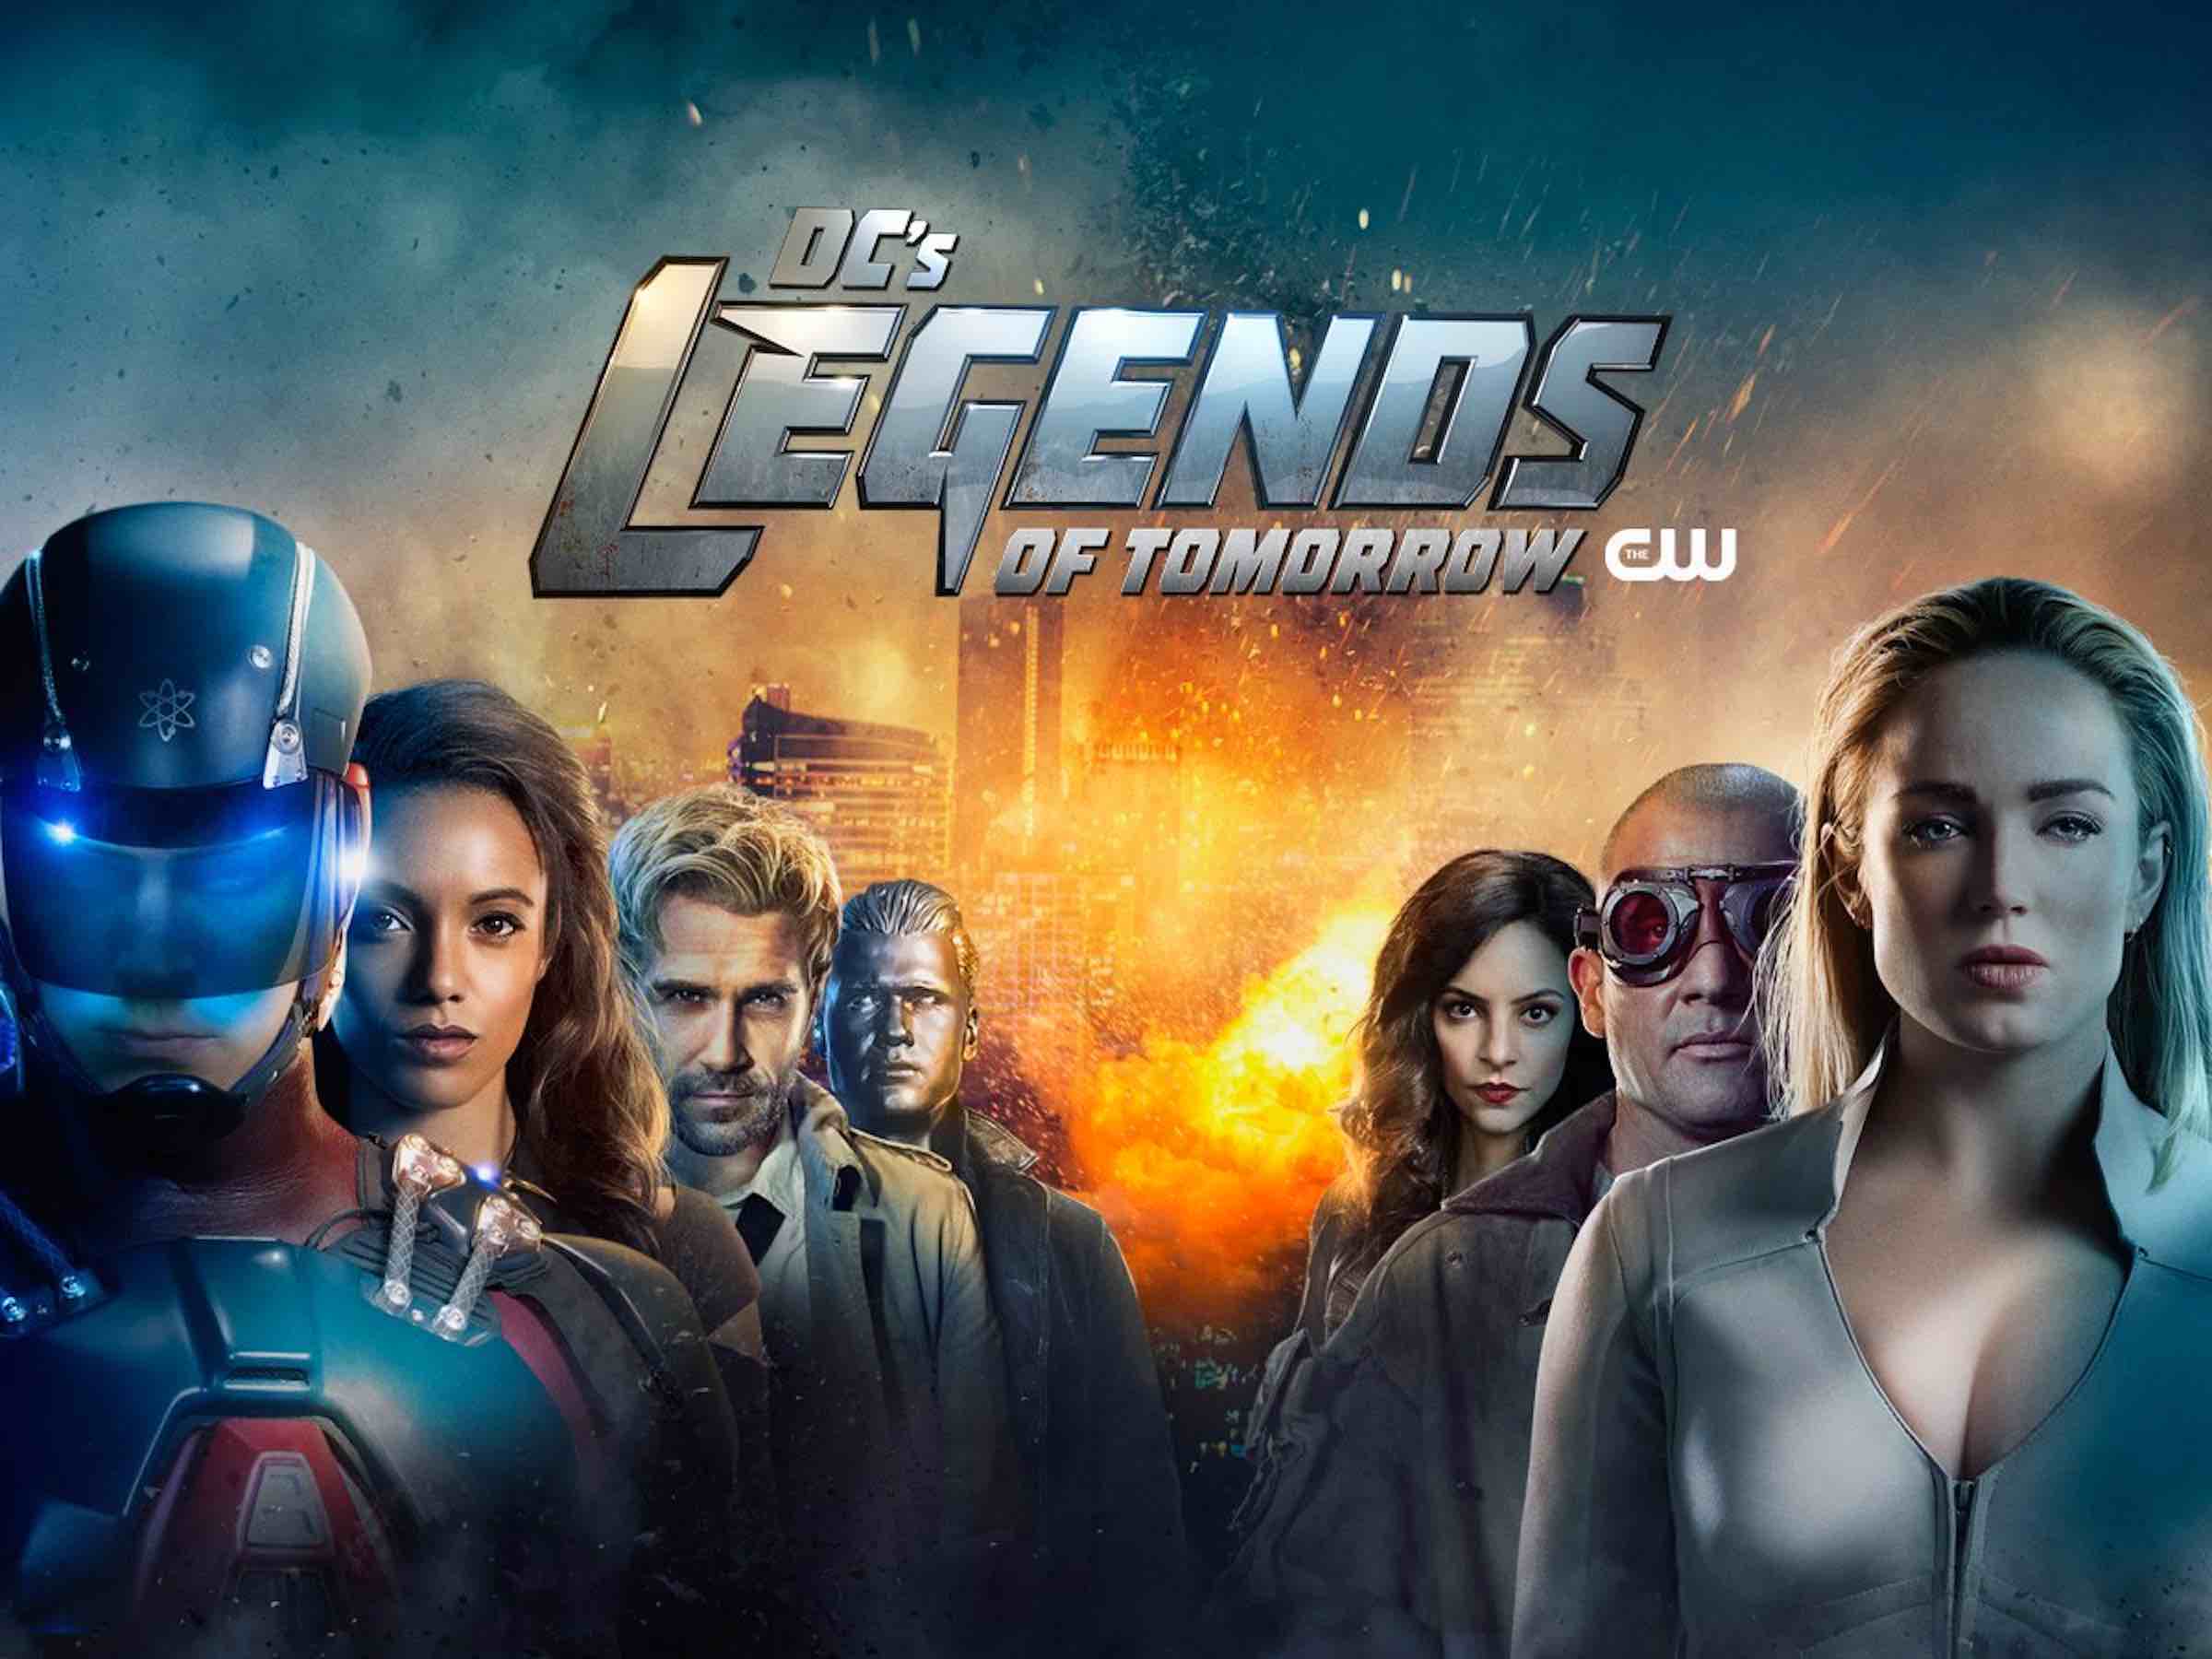 Grab your Cold Gun (too soon?) and your Timeship and see if you can save the future with our 'Legends of Tomorrow' quiz.